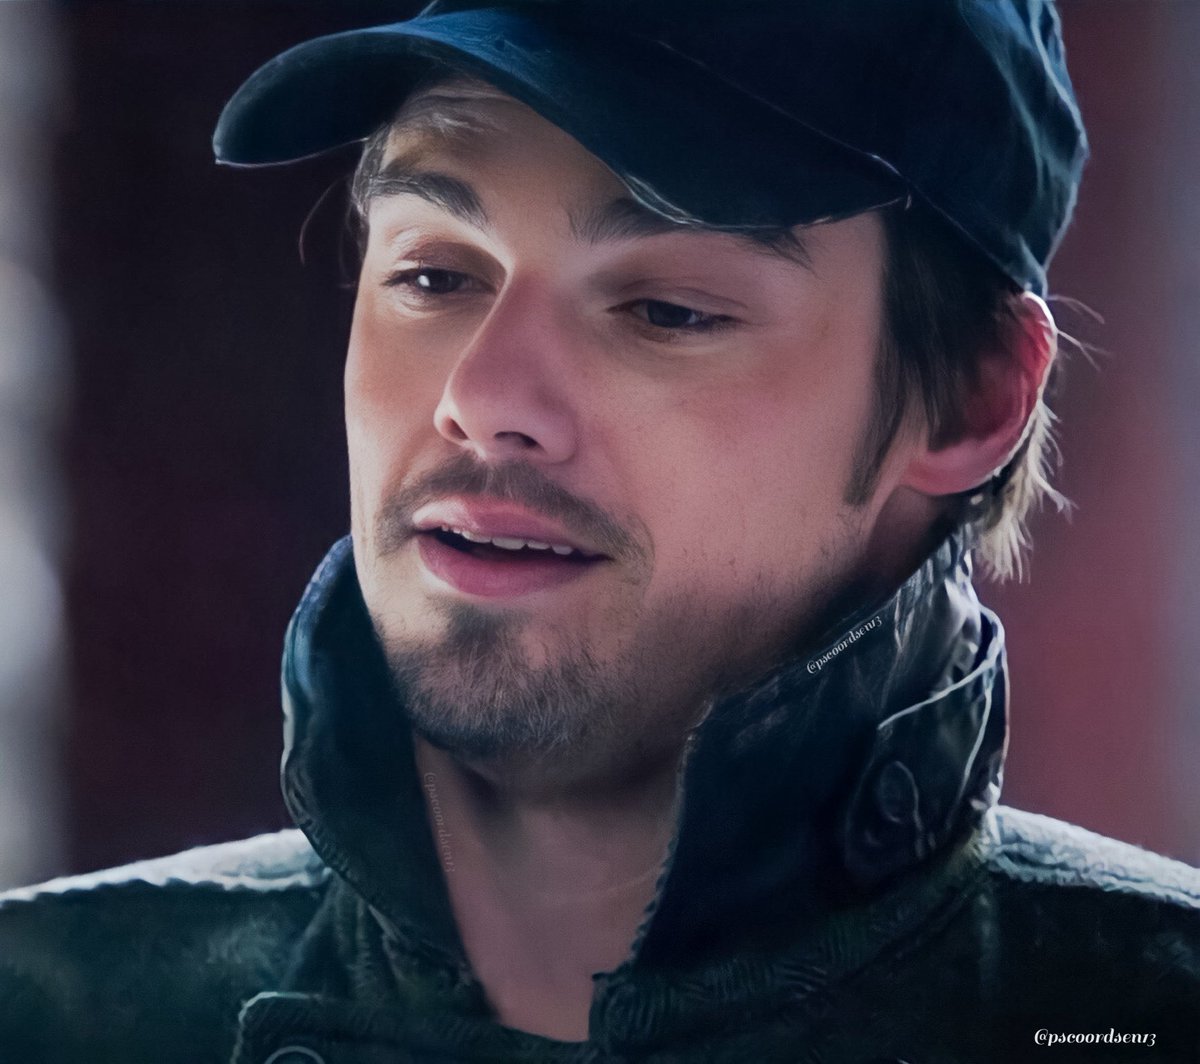 @tbrock623 @57Veronica My pleasure Tracey😘Glad the weather is better and I hope your allergies will too, very soon☘️. Have a splendid Saturday and a peaceful weekend you all🌹🥰💕.

#JustJayRyan #EverydayGorgeous 

#BatB  #BeautyAndTheBeast